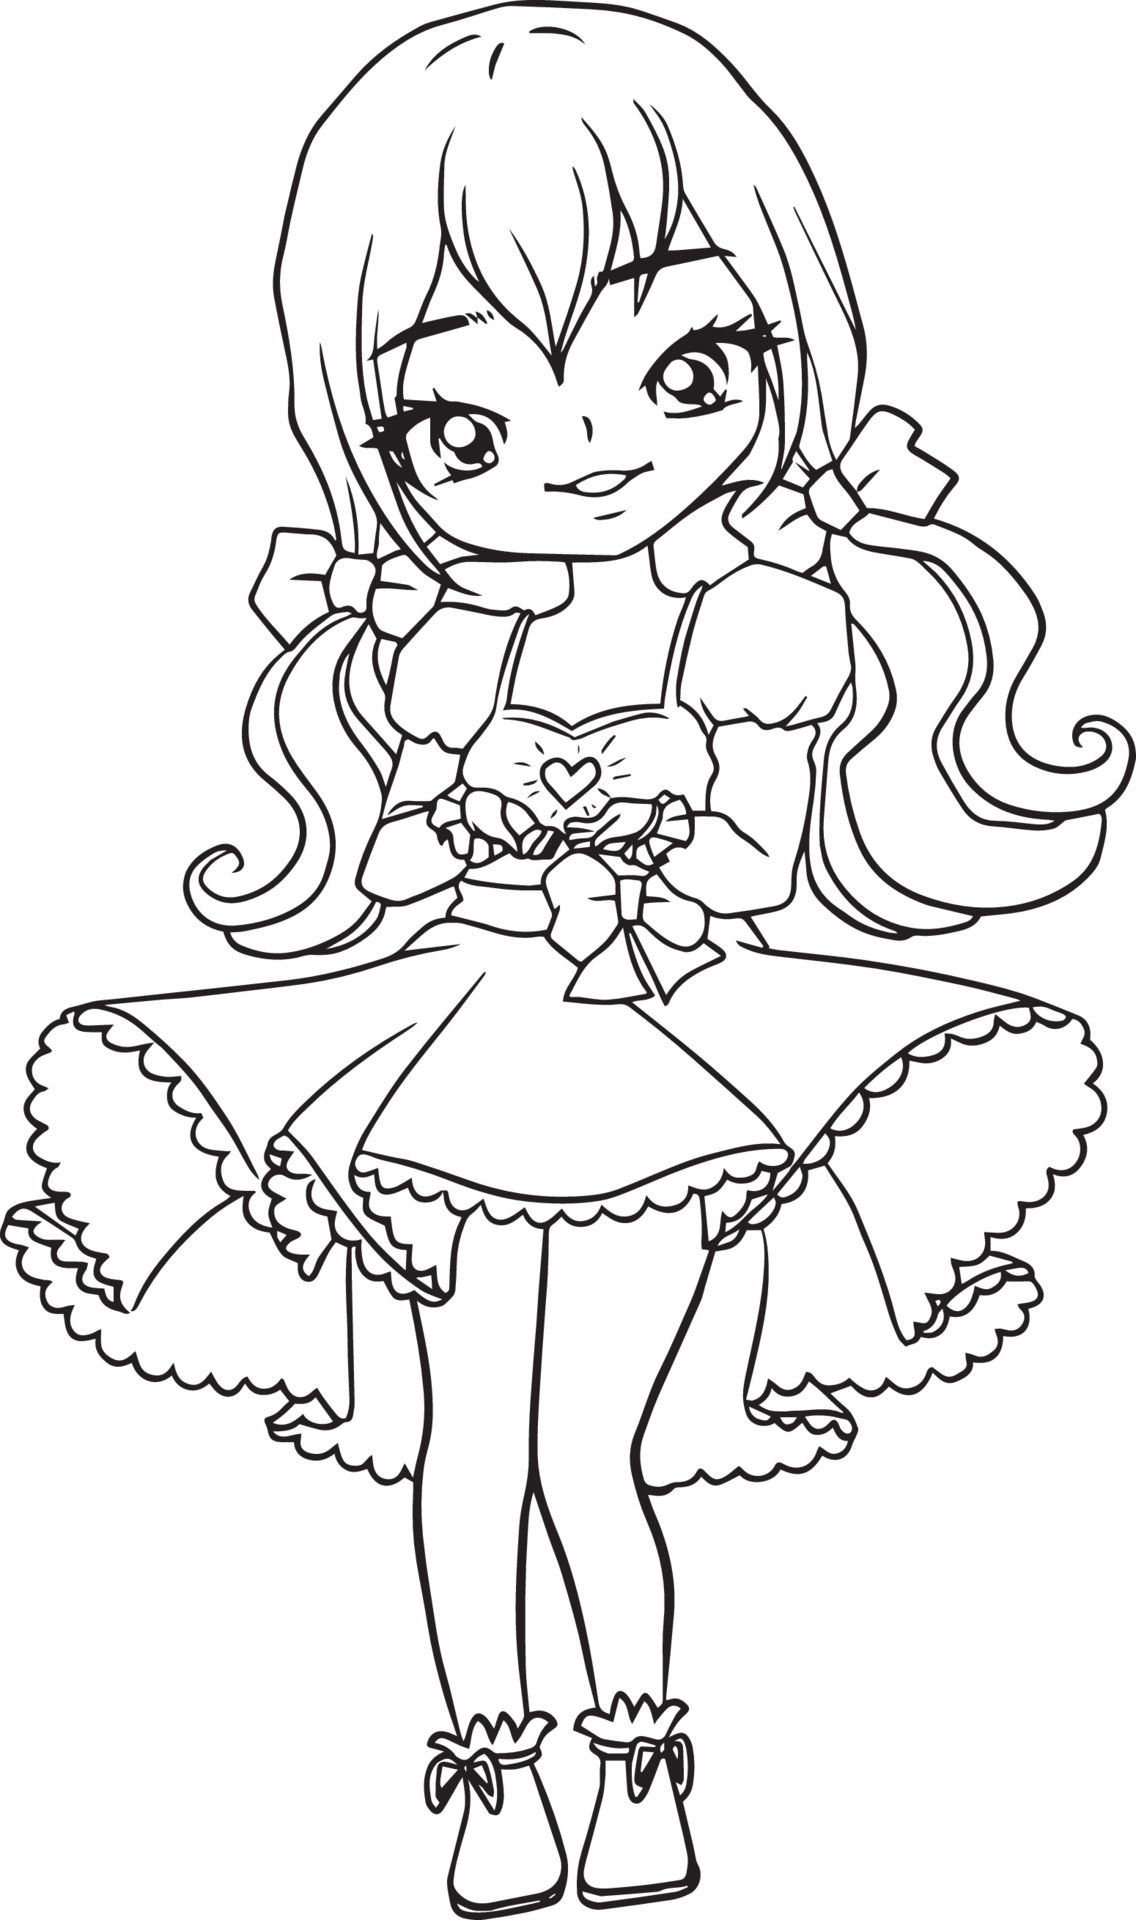 Anime Girls Coloring Pages - 100 Printable Coloring Pages